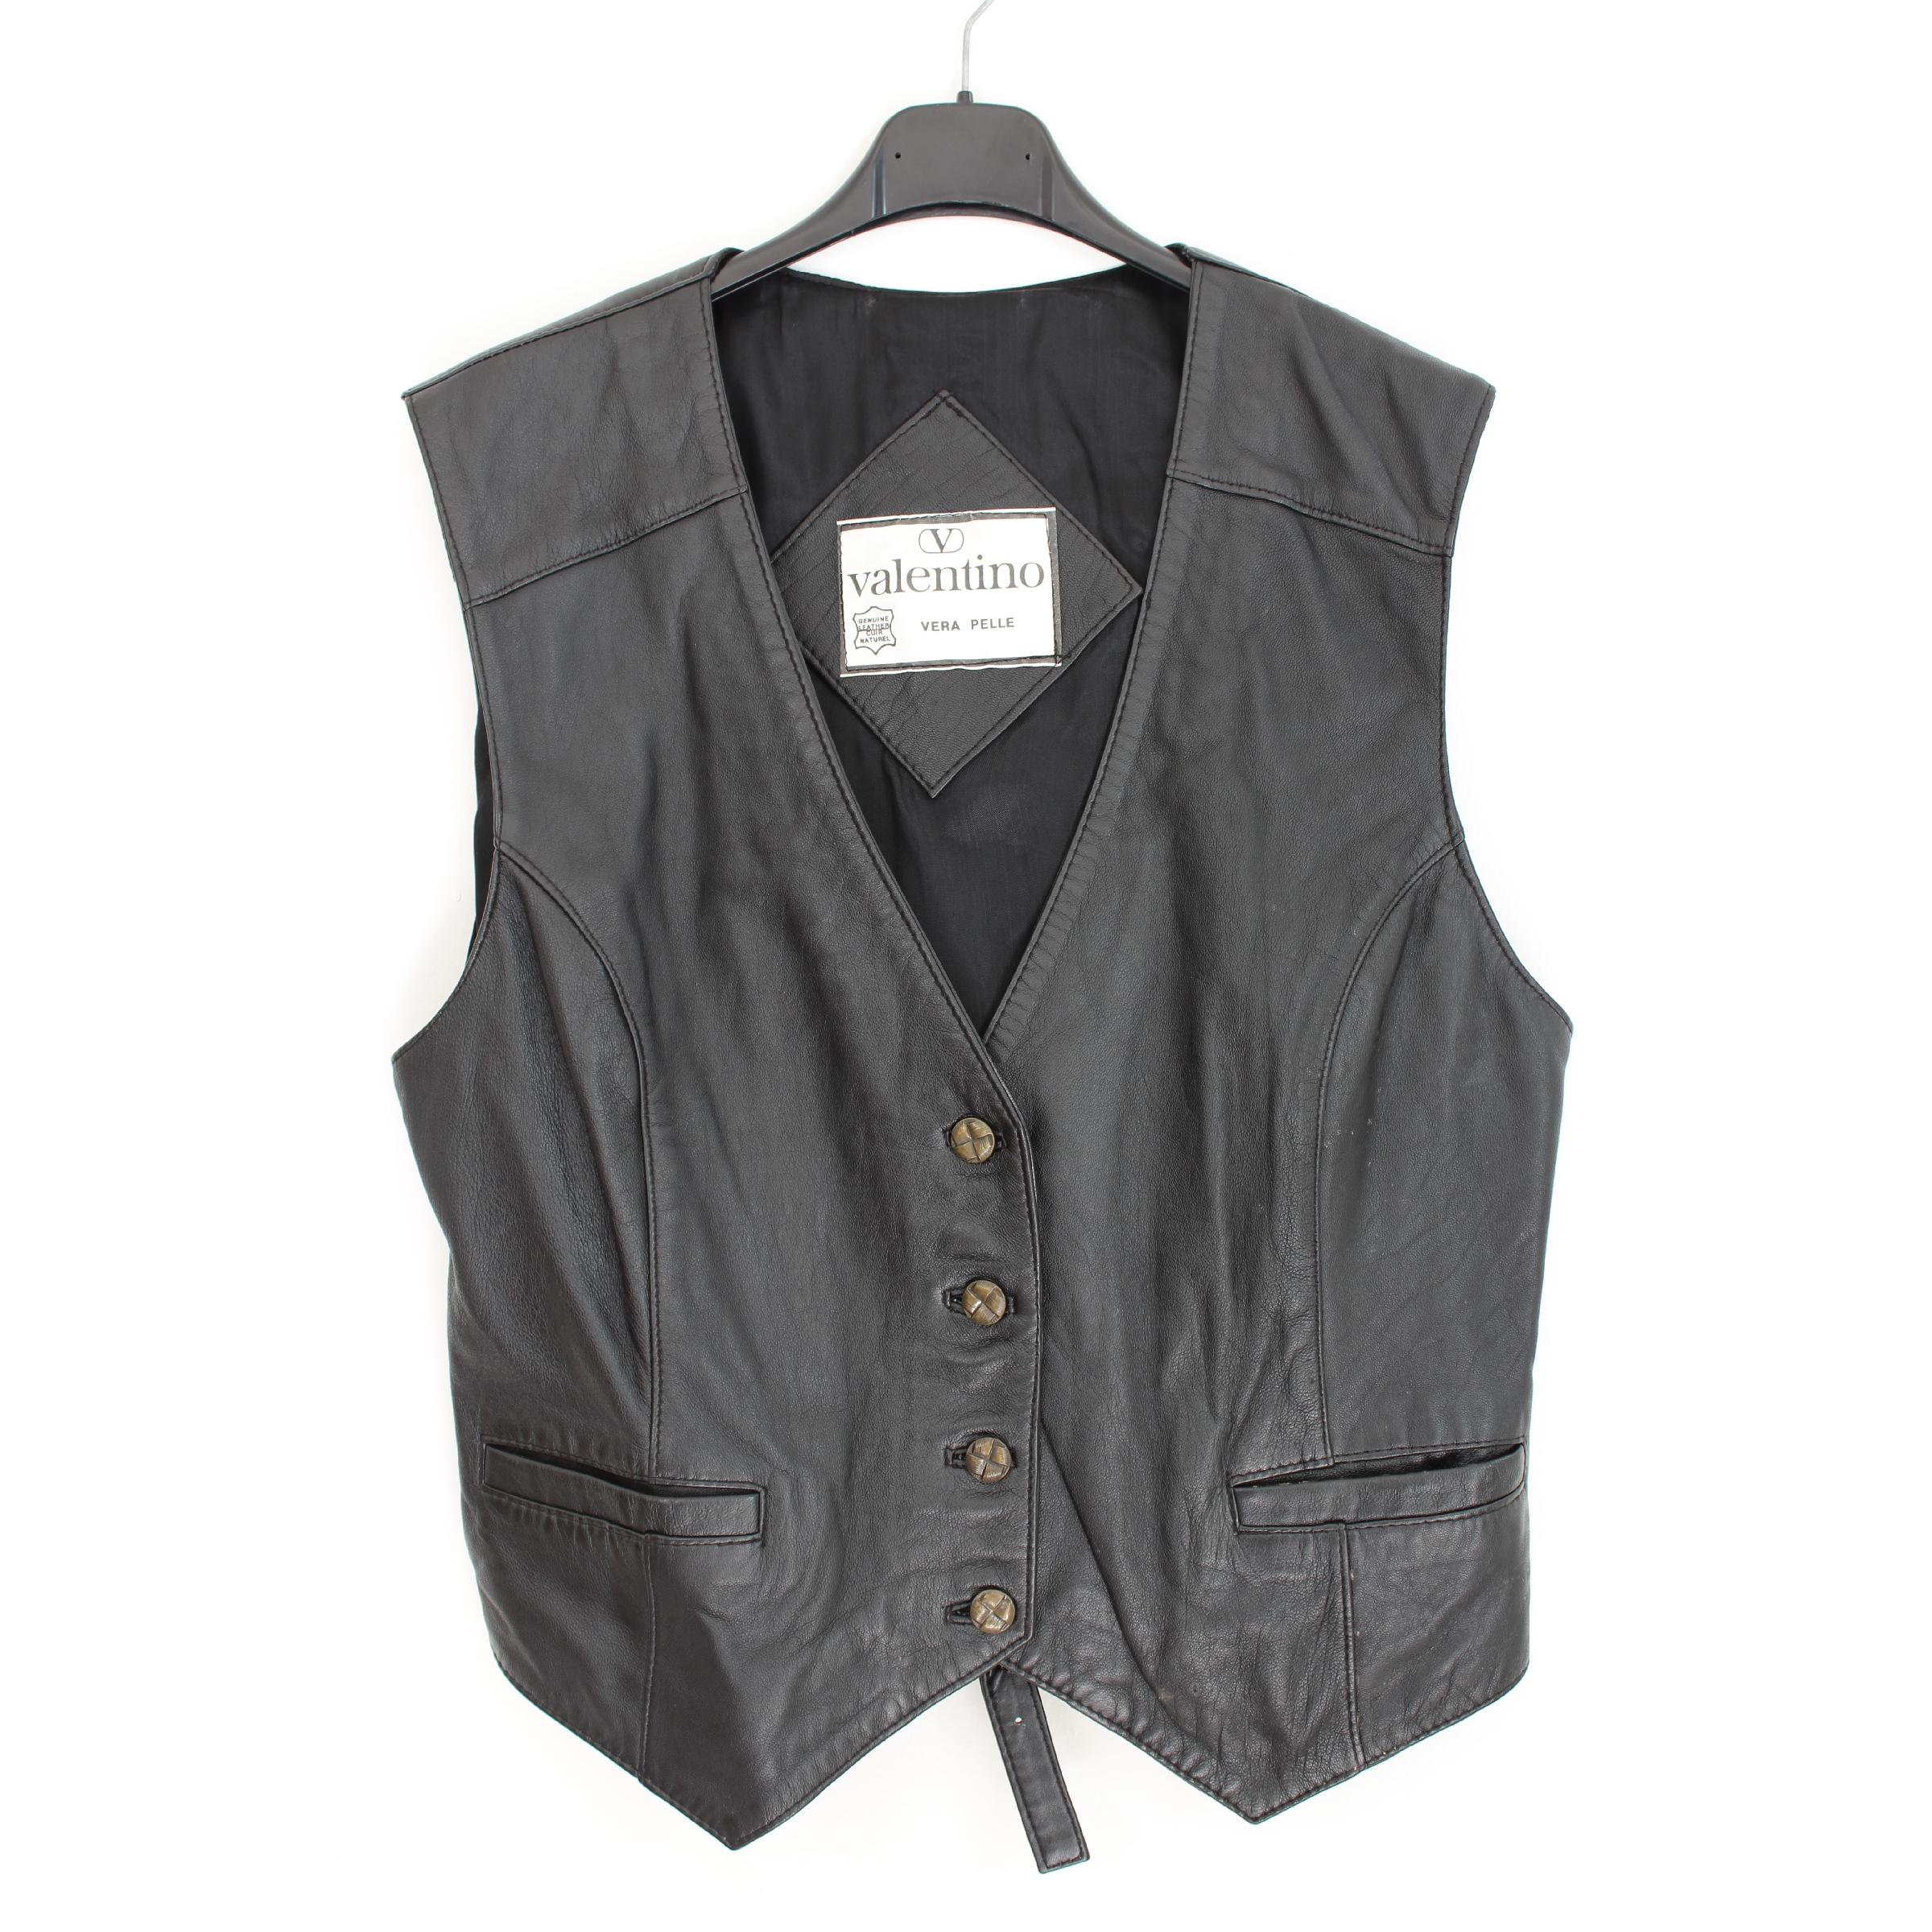 Valentino women's vintage waistcoat, black, 100% leather. Short model biker type, closure with buttons, adjustable strap. 1990s. Made in Italy. Very good vintage conditions.

Size: 42 It 8 Us 10 Uk
Shoulder: 42 cm
Bust / Chest: 50 cm
Length: 59 cm